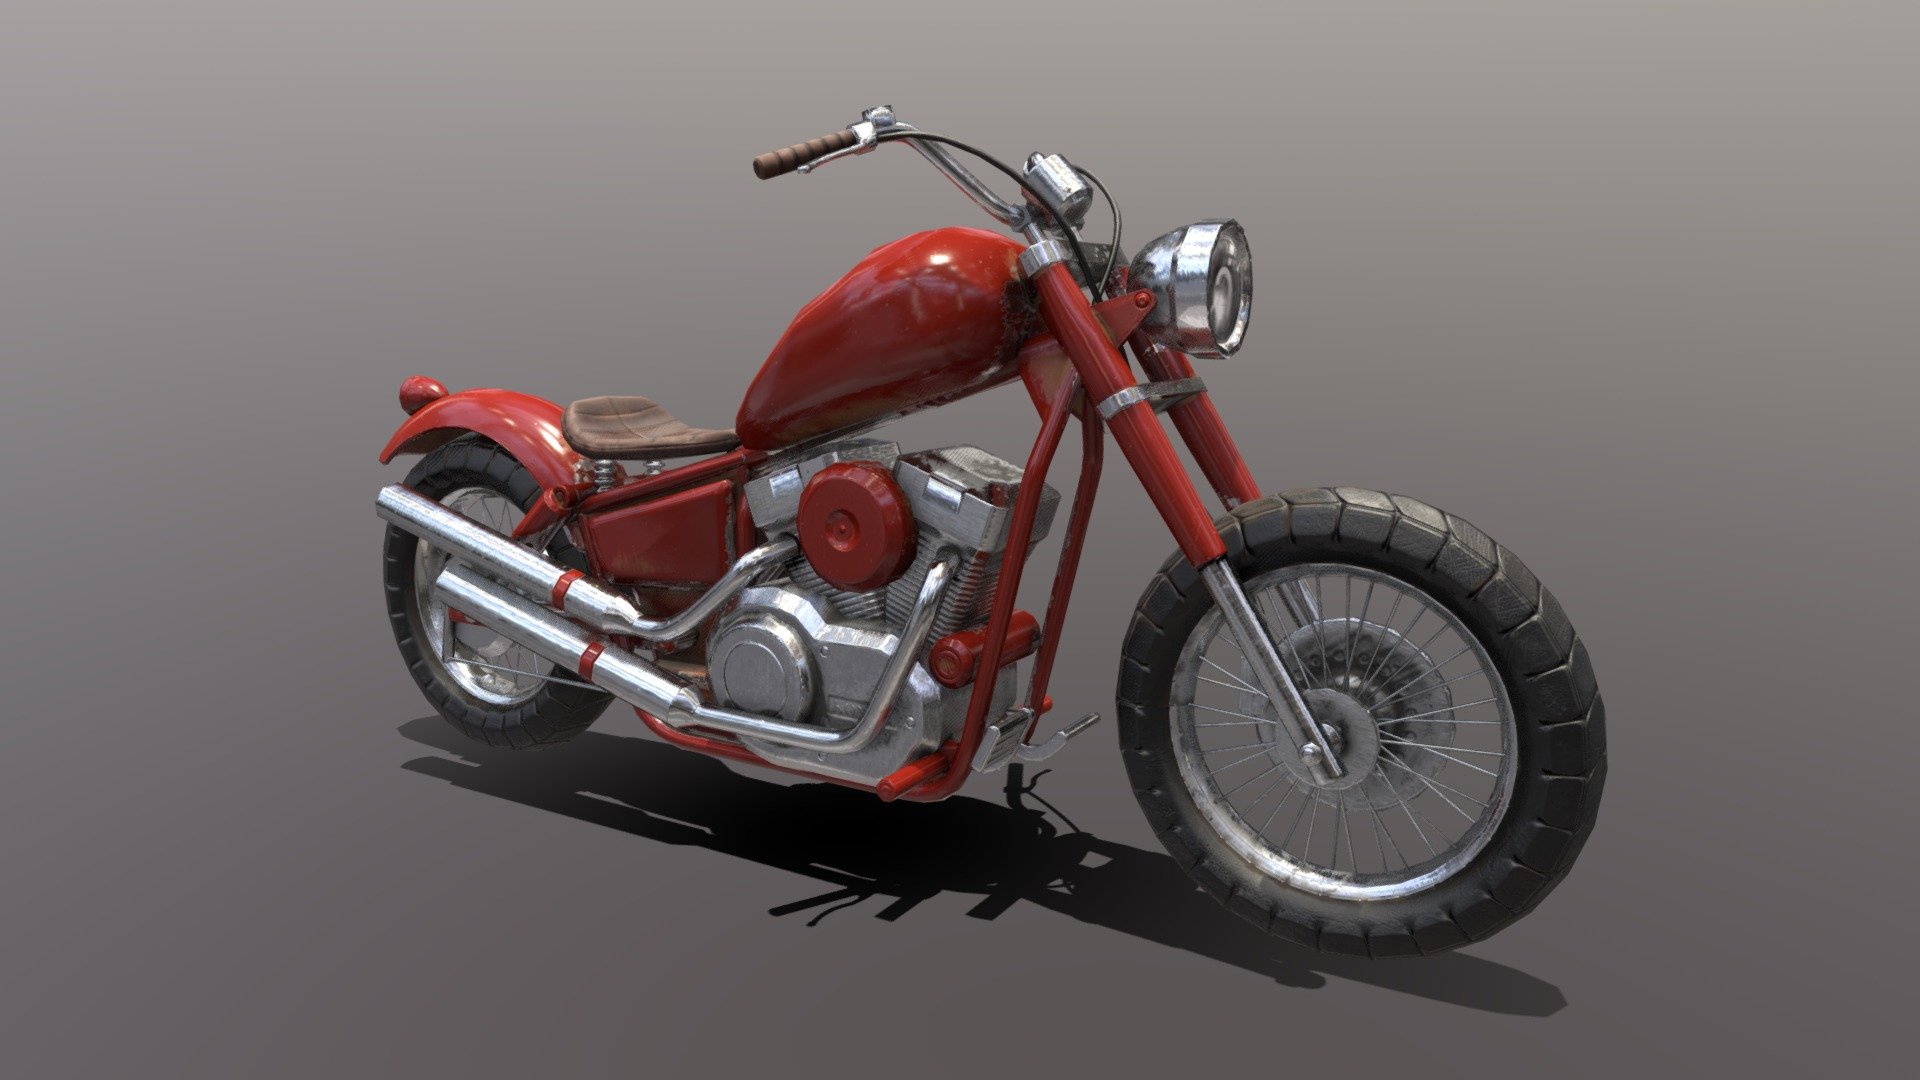 check this model ingame - Low poly Bobber motorcycle - 3D model by creosine 3d model